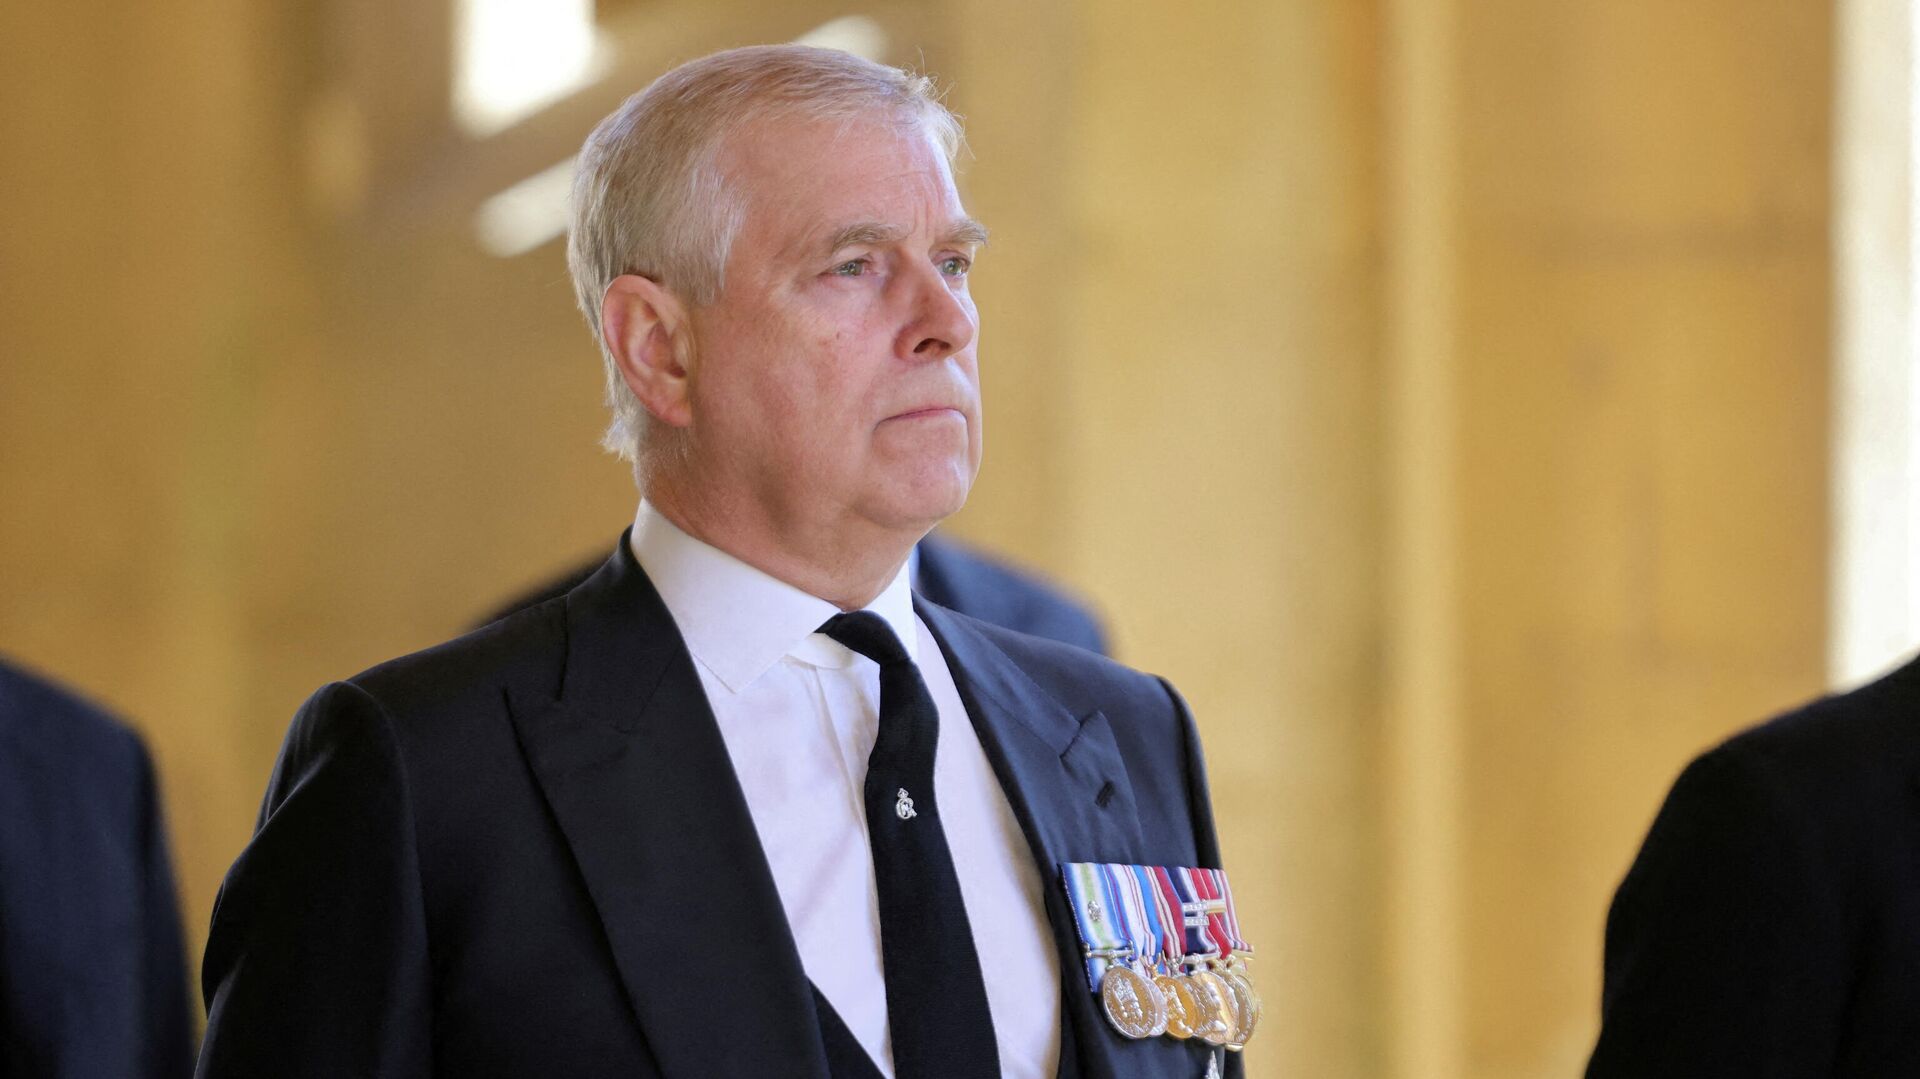 FILE PHOTO: Britain's Britain's Prince Andrew, Duke of York, looks on during the funeral of Britain's Prince Philip, husband of Queen Elizabeth, who died at the age of 99, in Windsor, Britain, April 17, 2021 - Sputnik International, 1920, 20.02.2022